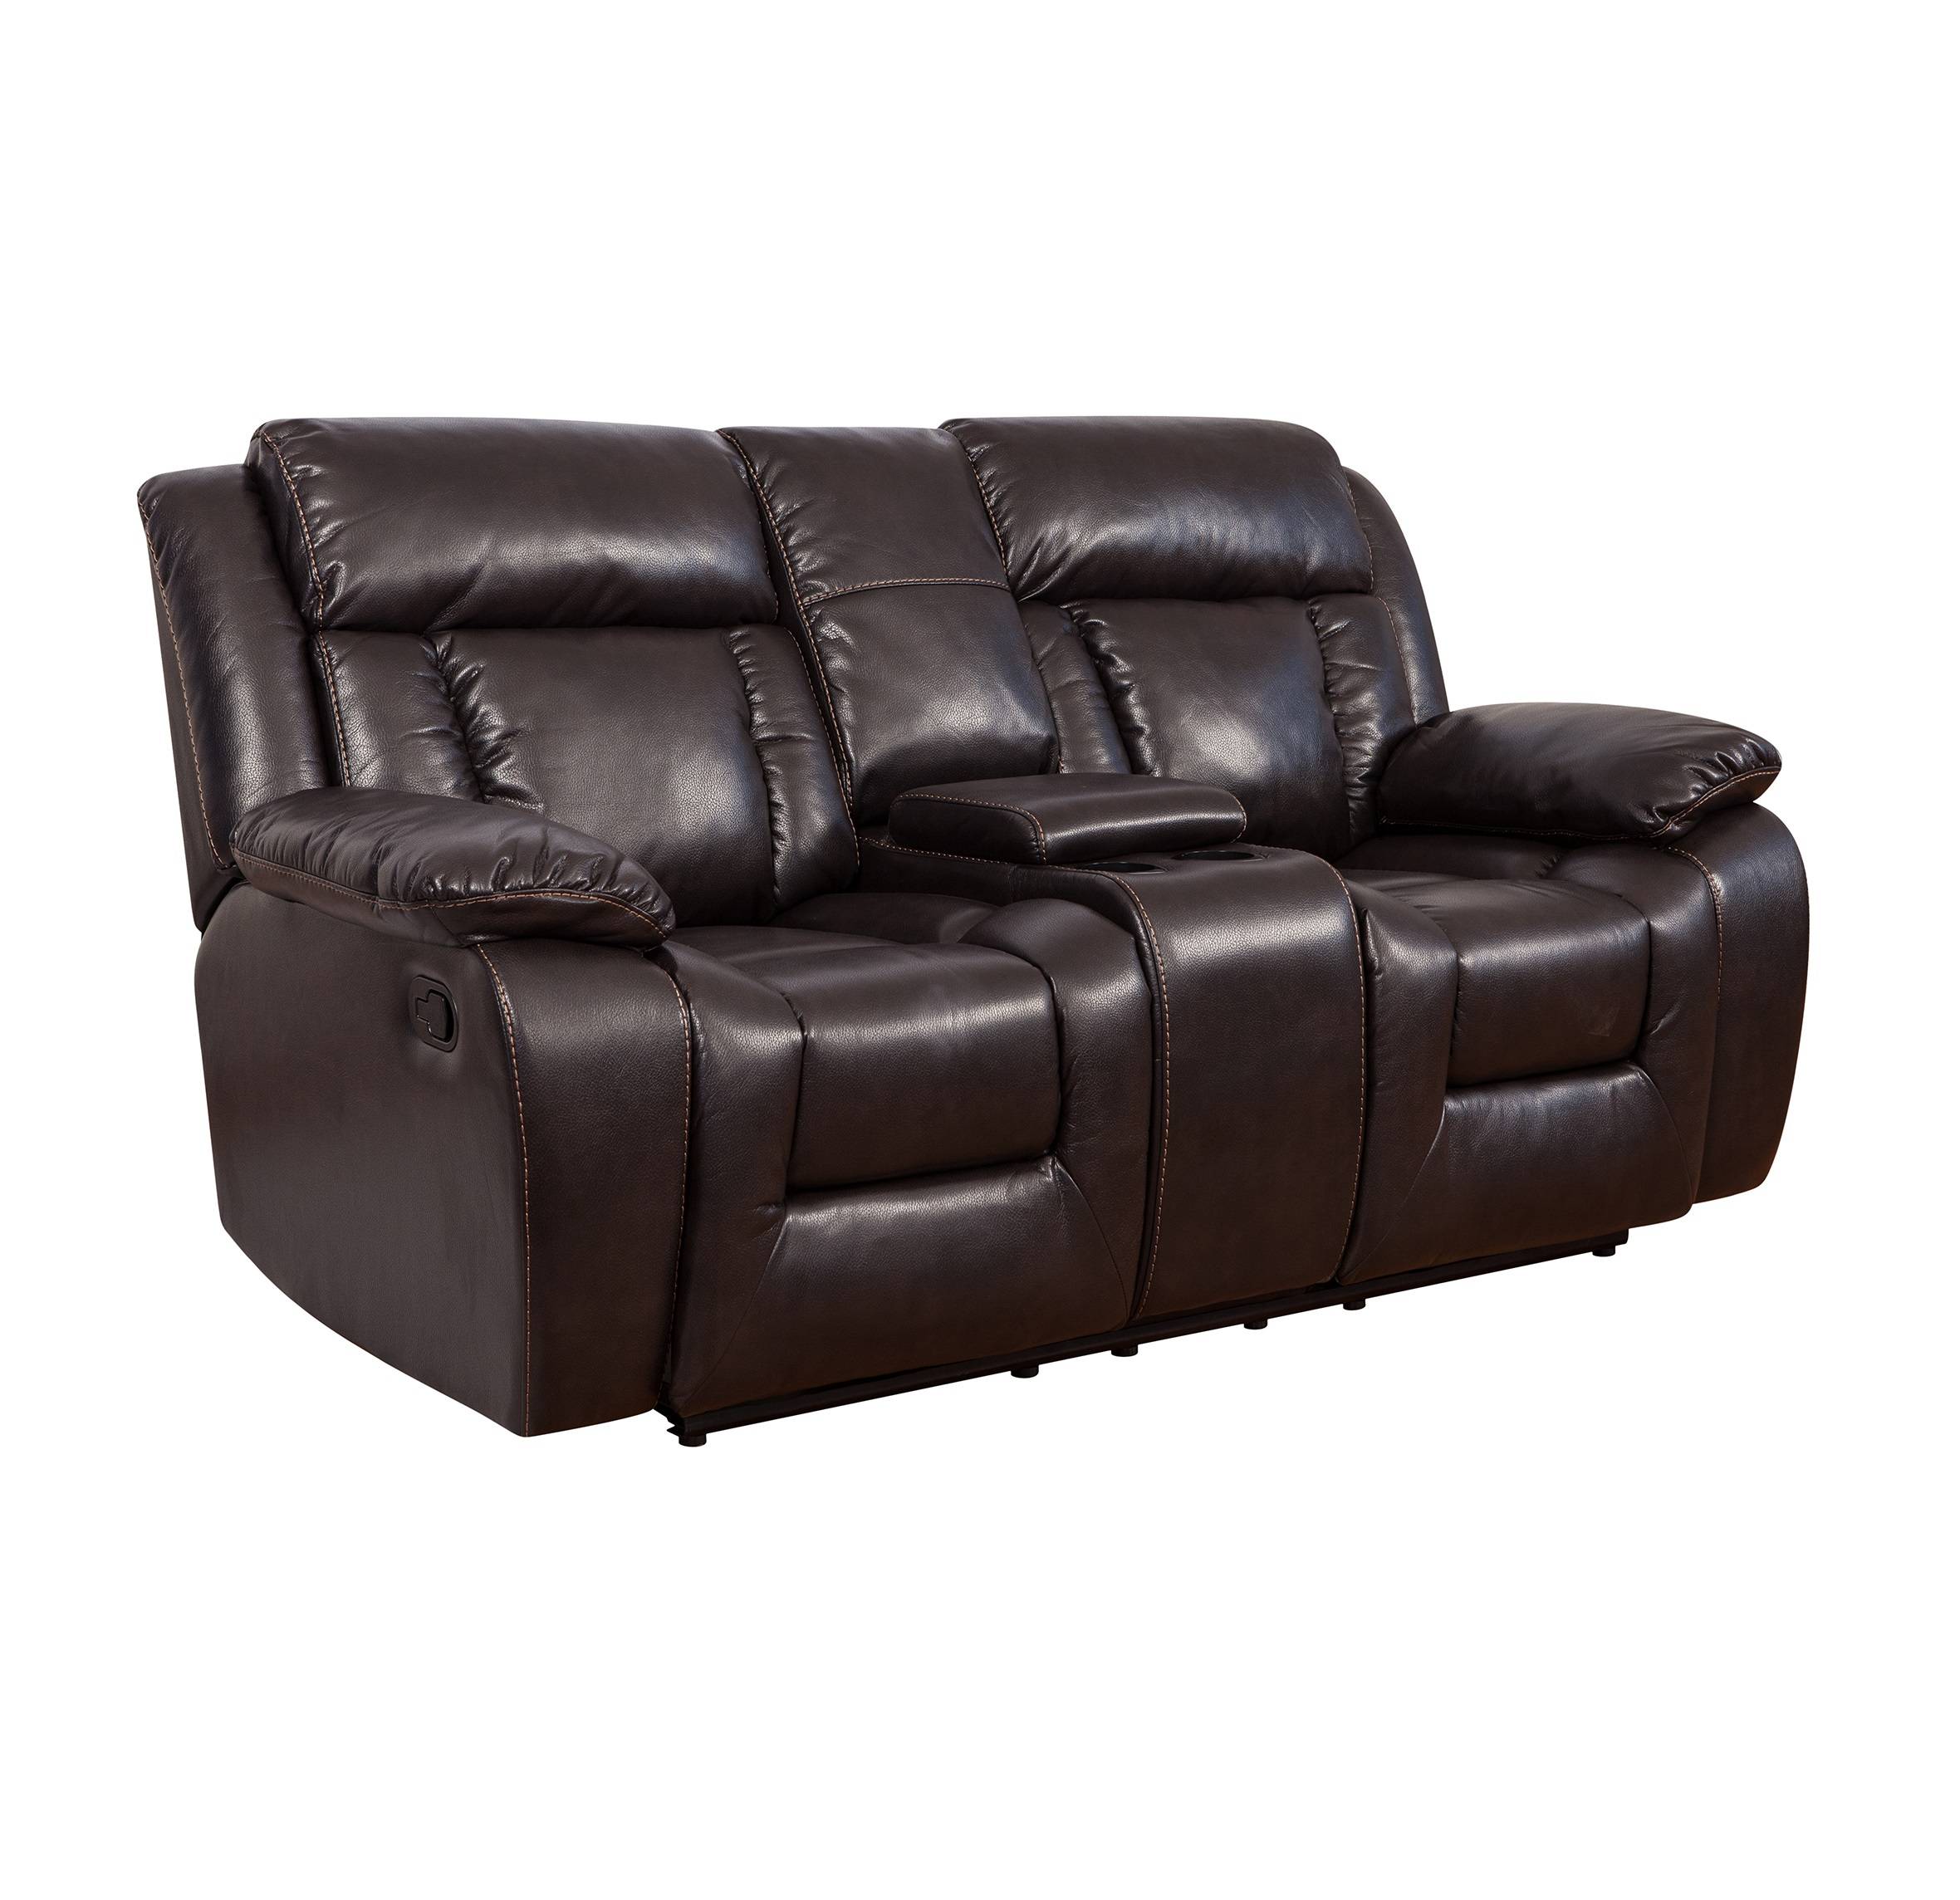 Royal genuine Leather home cinema 2 seater couple recliner sofa